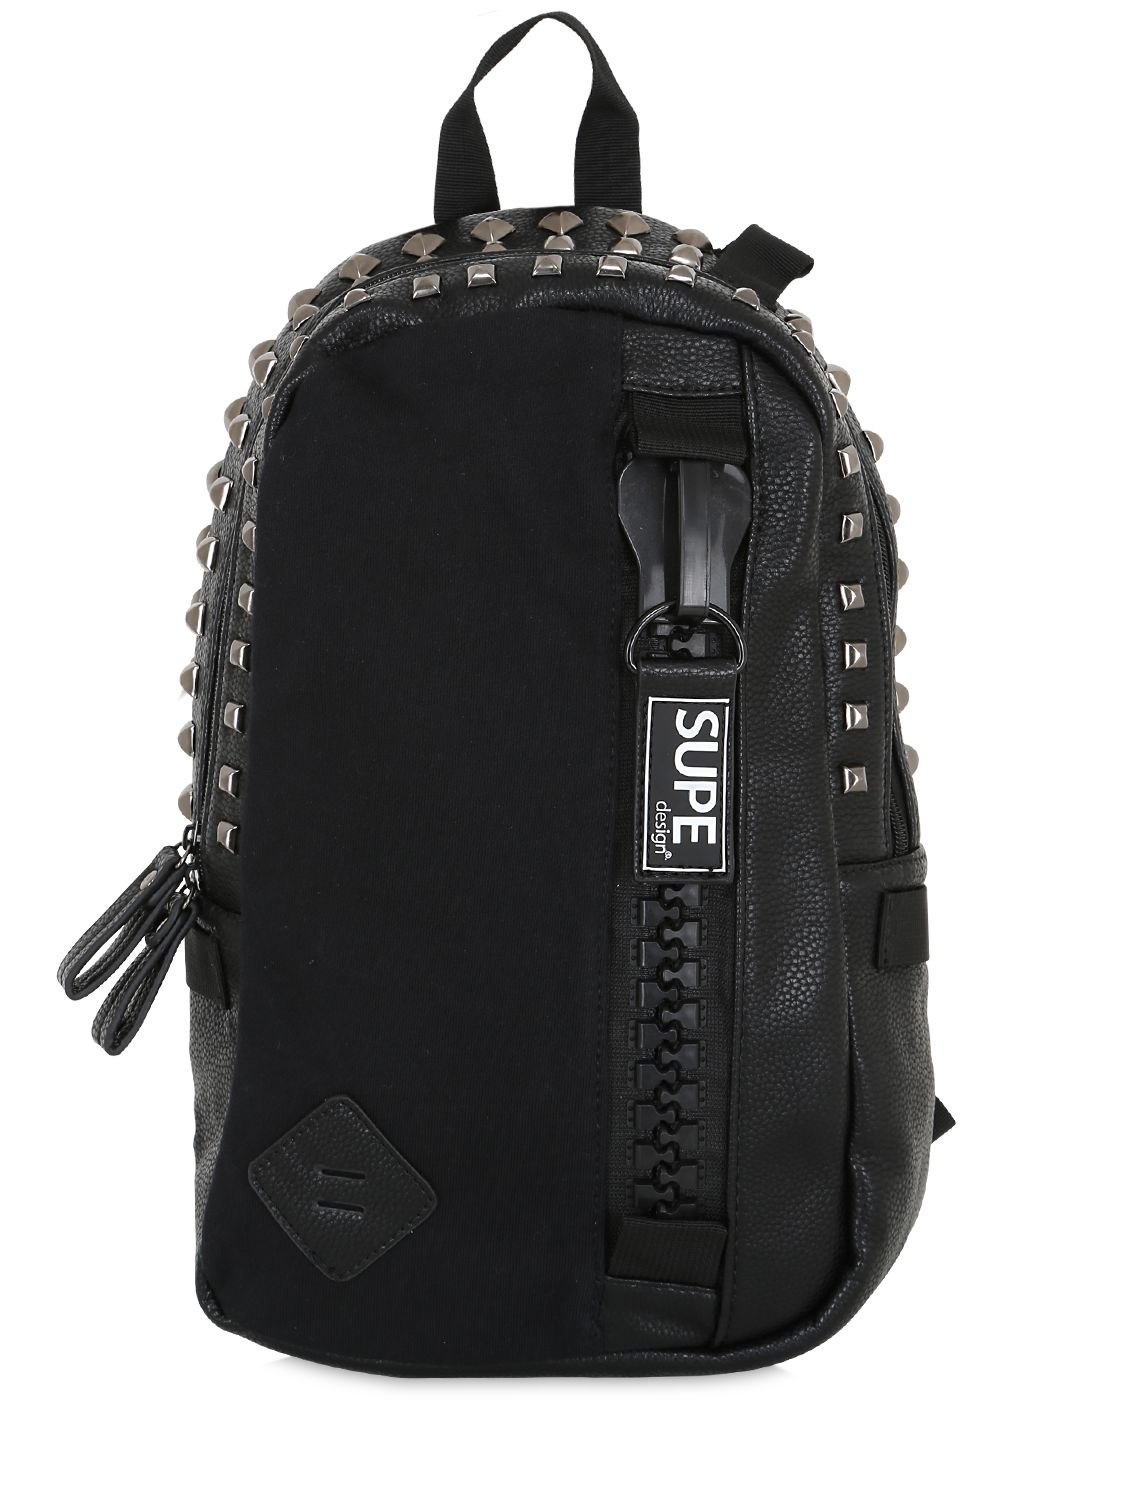 Lyst - Supe Design Mini Day Studded Faux Leather Backpack in Black for Men